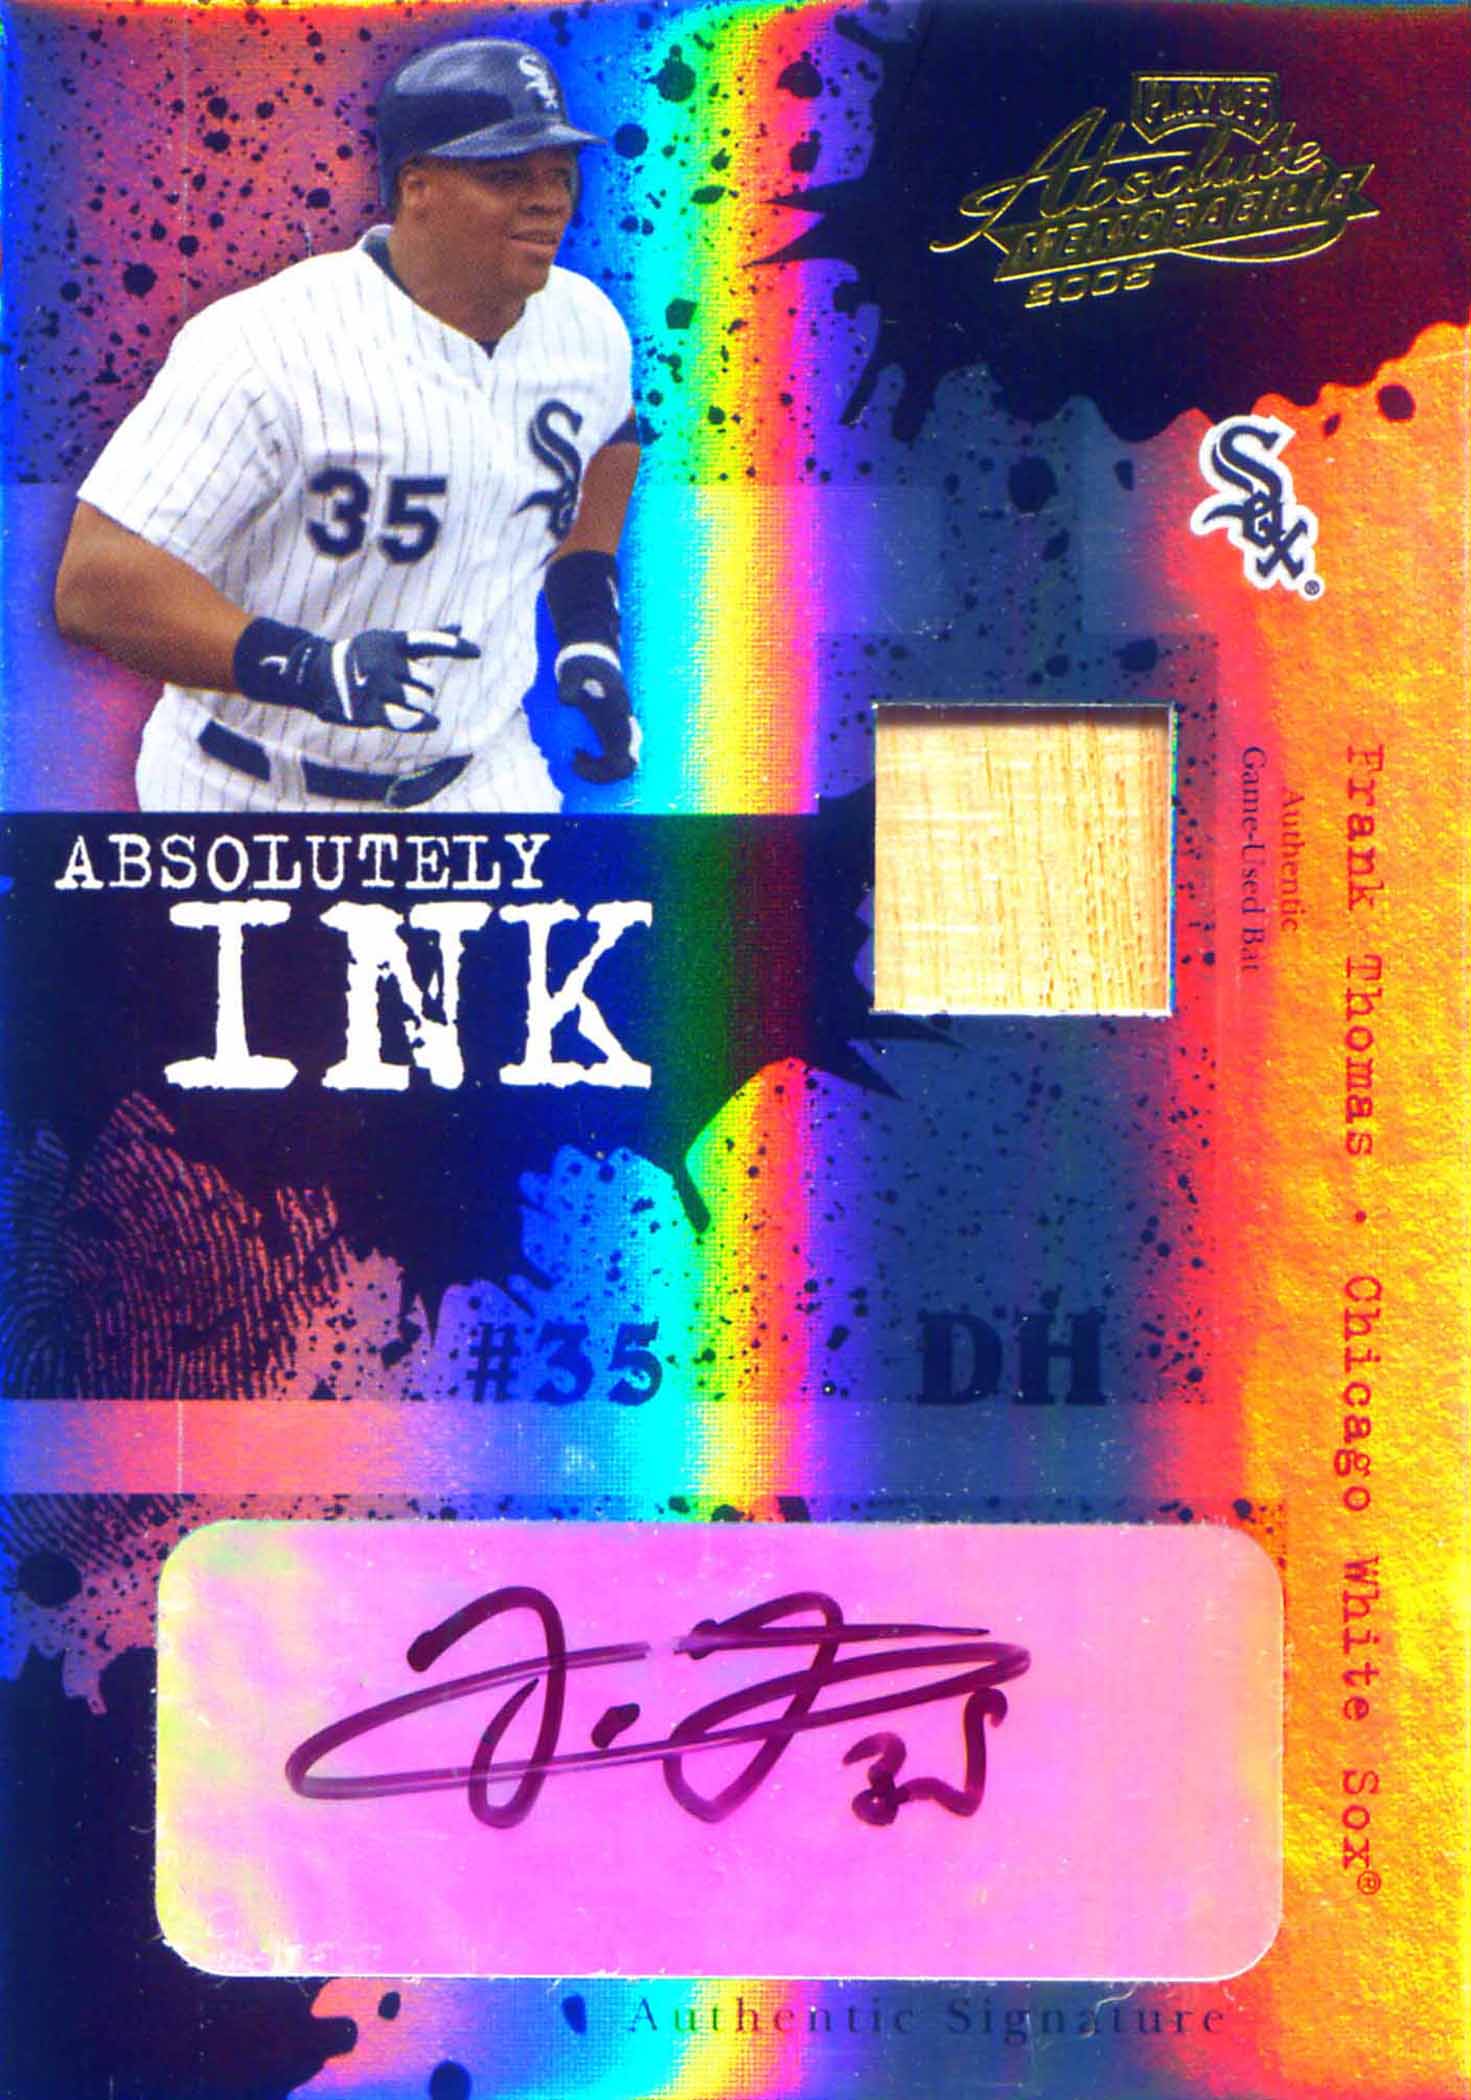 2007 Ultimate Collection Ultimate Star Materials